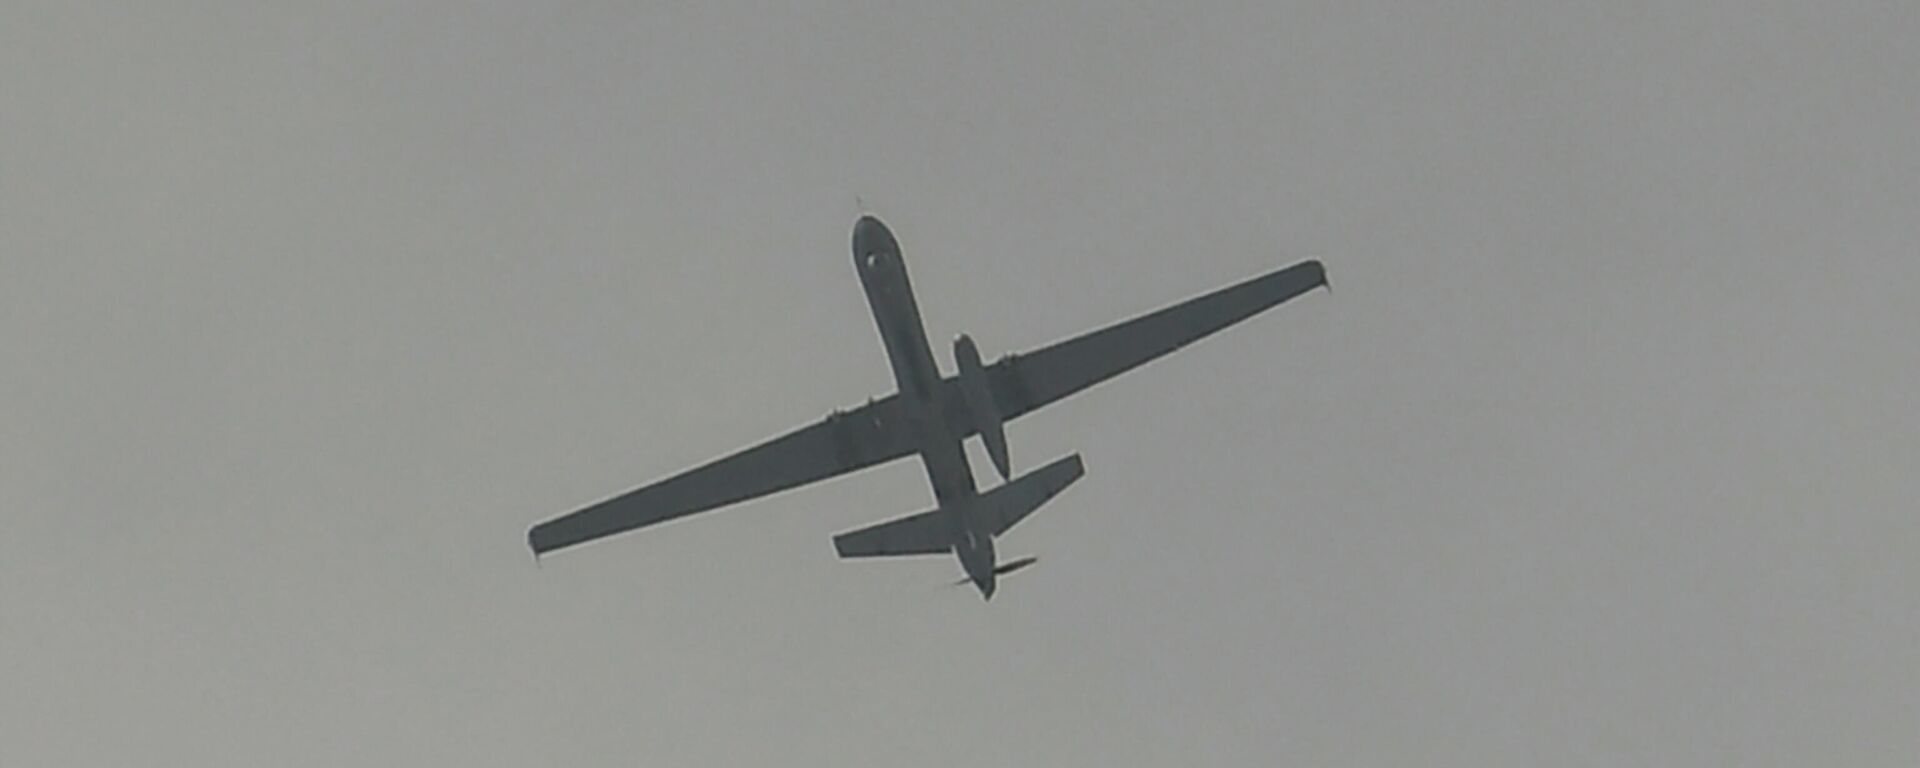 A drone flies over the airport in Kabul on August 31, 2021. - The US military announced it has completed its withdrawal from Afghanistan after a brutal 20-year war -- one that started and ended with the hardline Islamist Taliban in power, despite billions of dollars spent trying to rebuild the conflict-wracked country. - Sputnik International, 1920, 06.12.2021